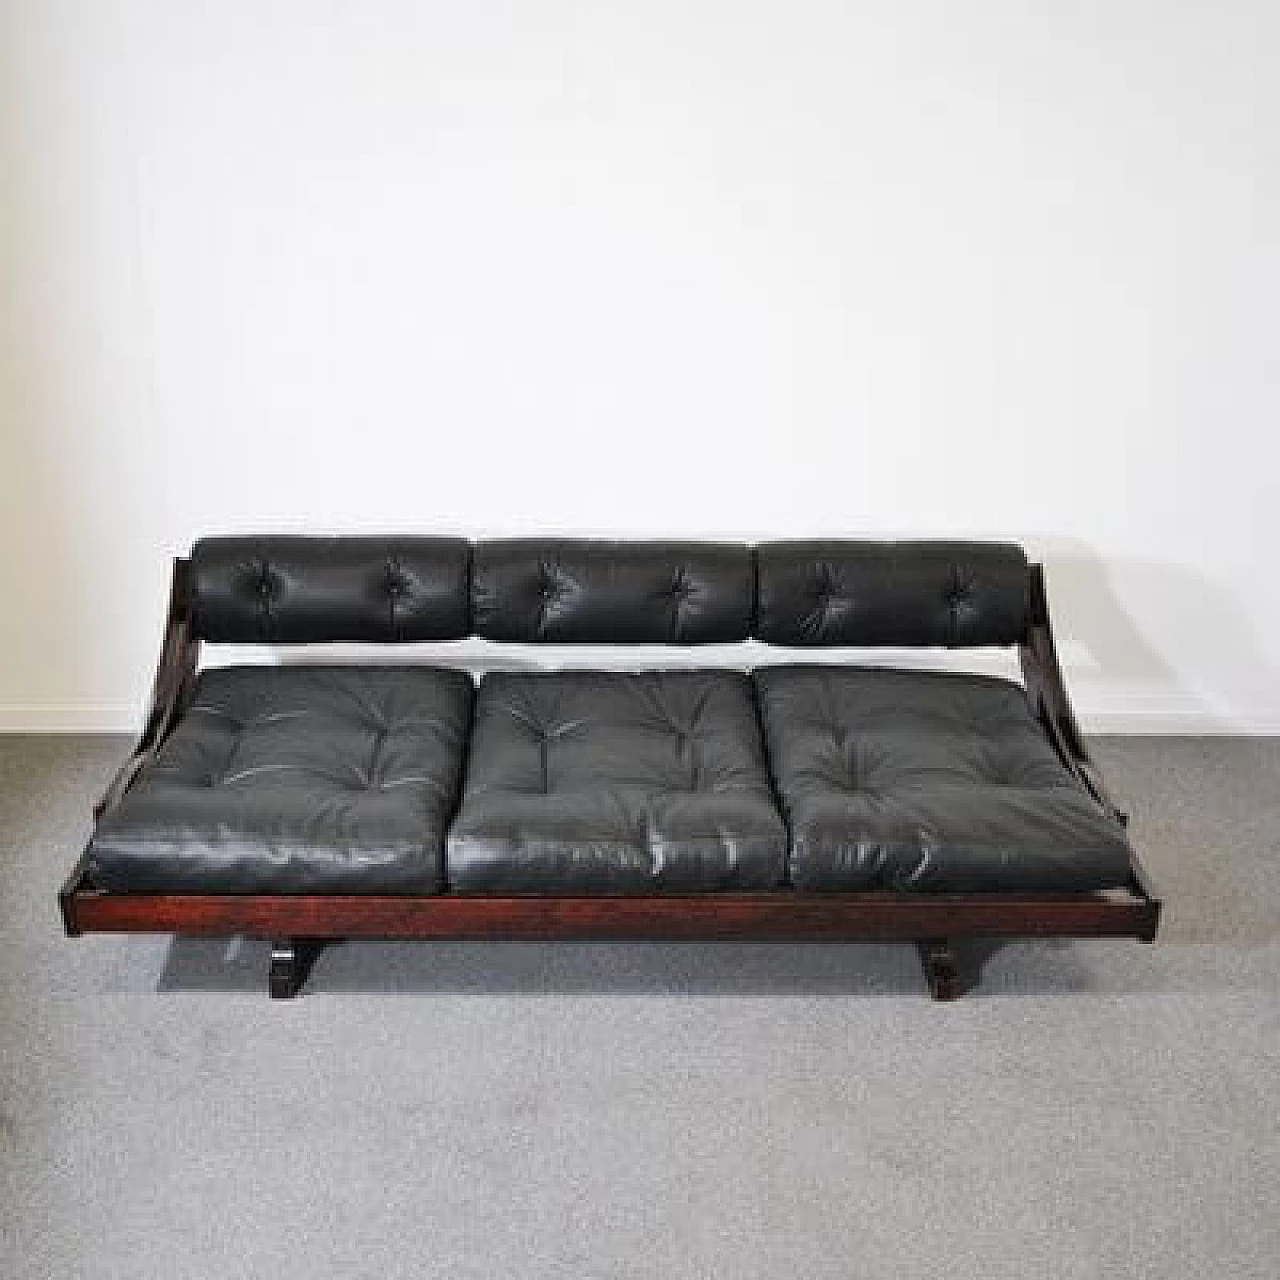 GS195 wooden and leather sofa by Gianni Songia for Luigi Sormani, 1970s 1412262